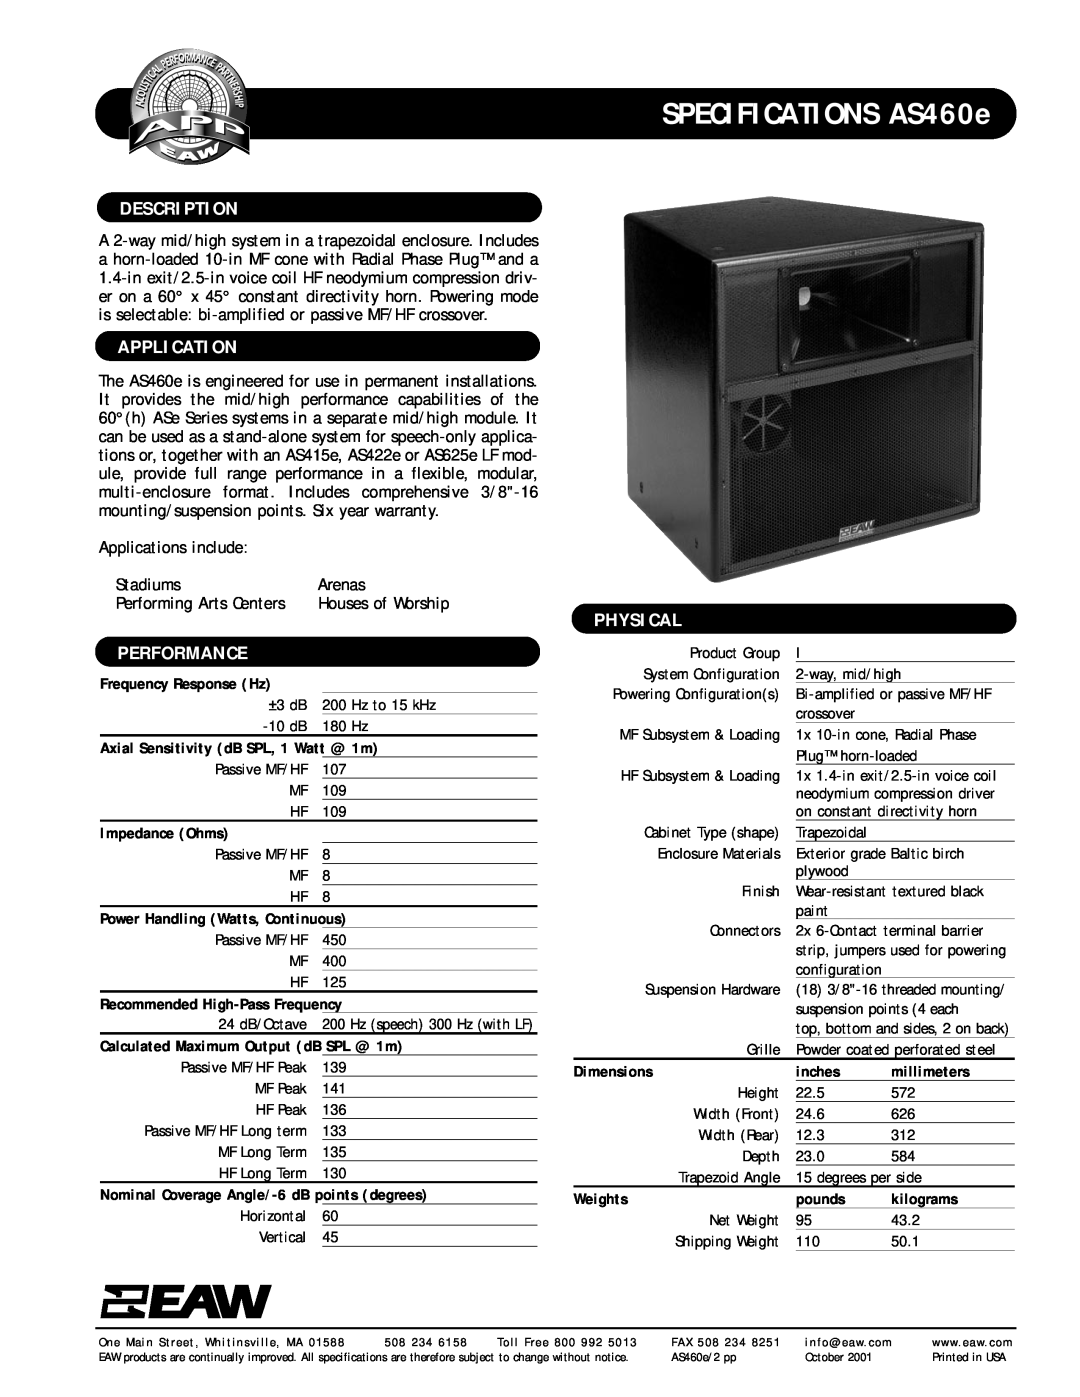 EAW specifications SPECIFICATIONS AS460e, Description, Application, Performance, Physical 